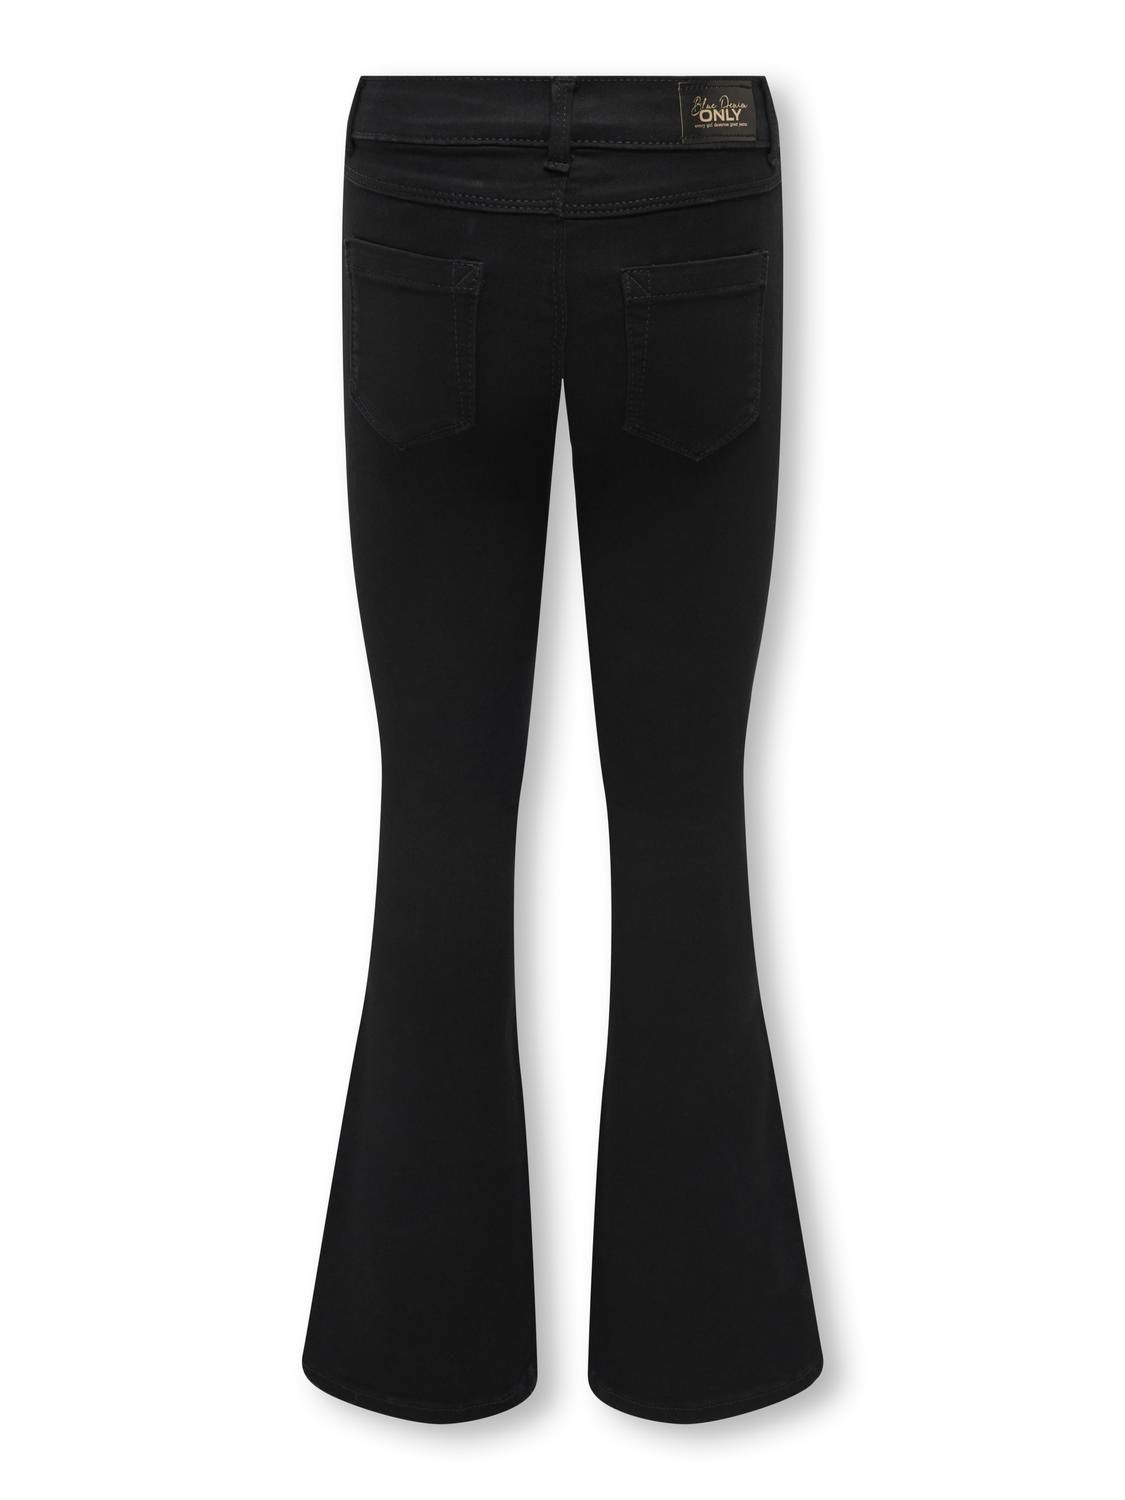 ONLY Jeans Flared Fit Taille moyenne -Black Denim - 15297579